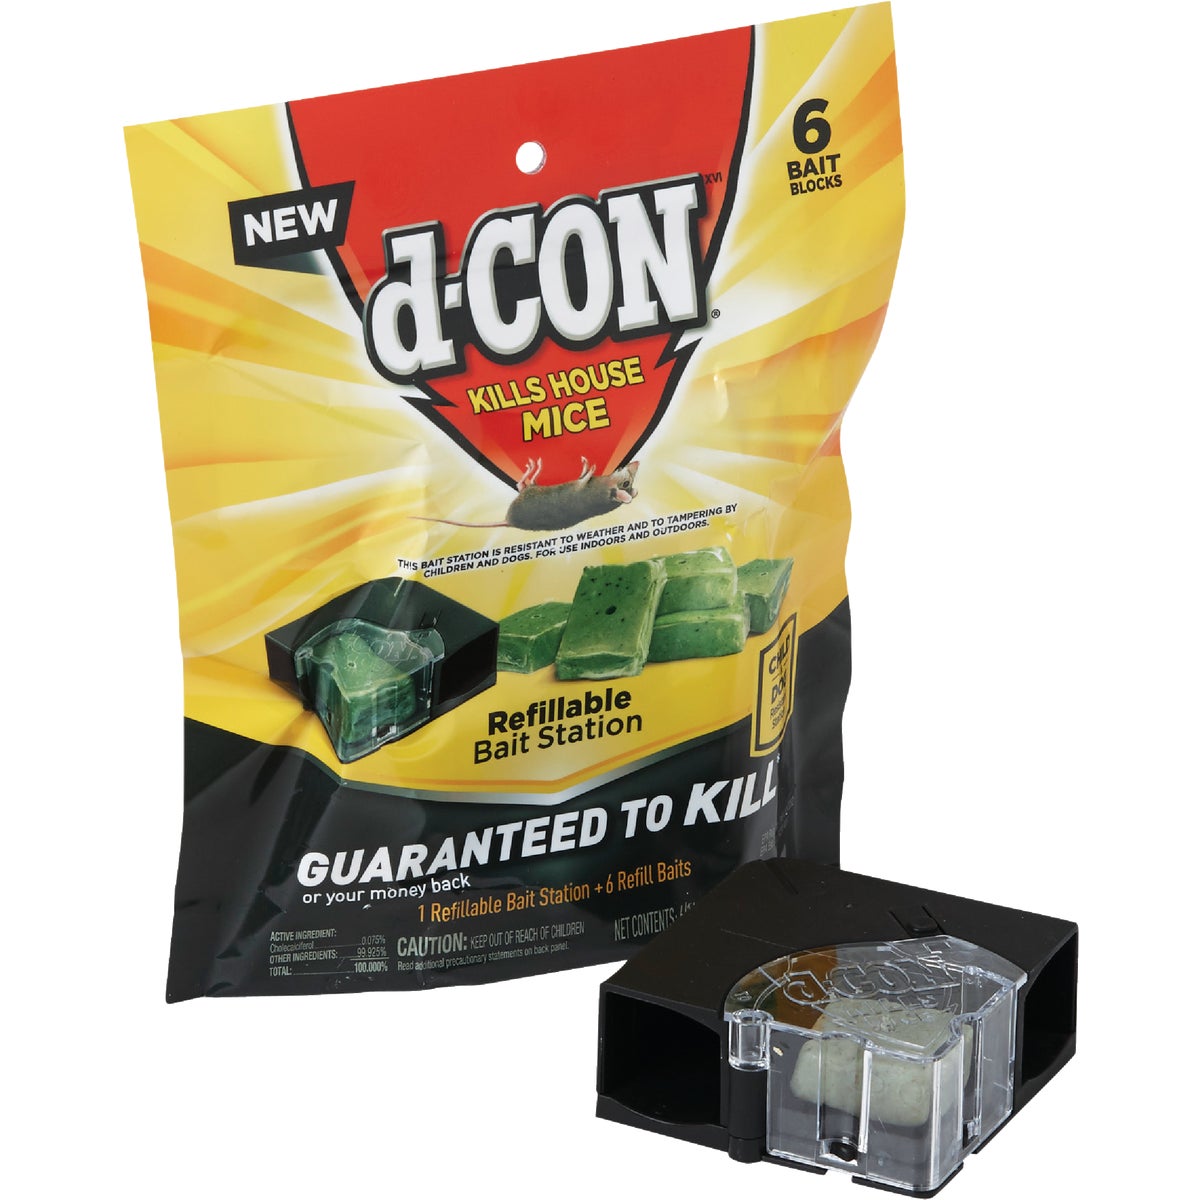 Item 705310, D-Con refillable mouse bait station with.